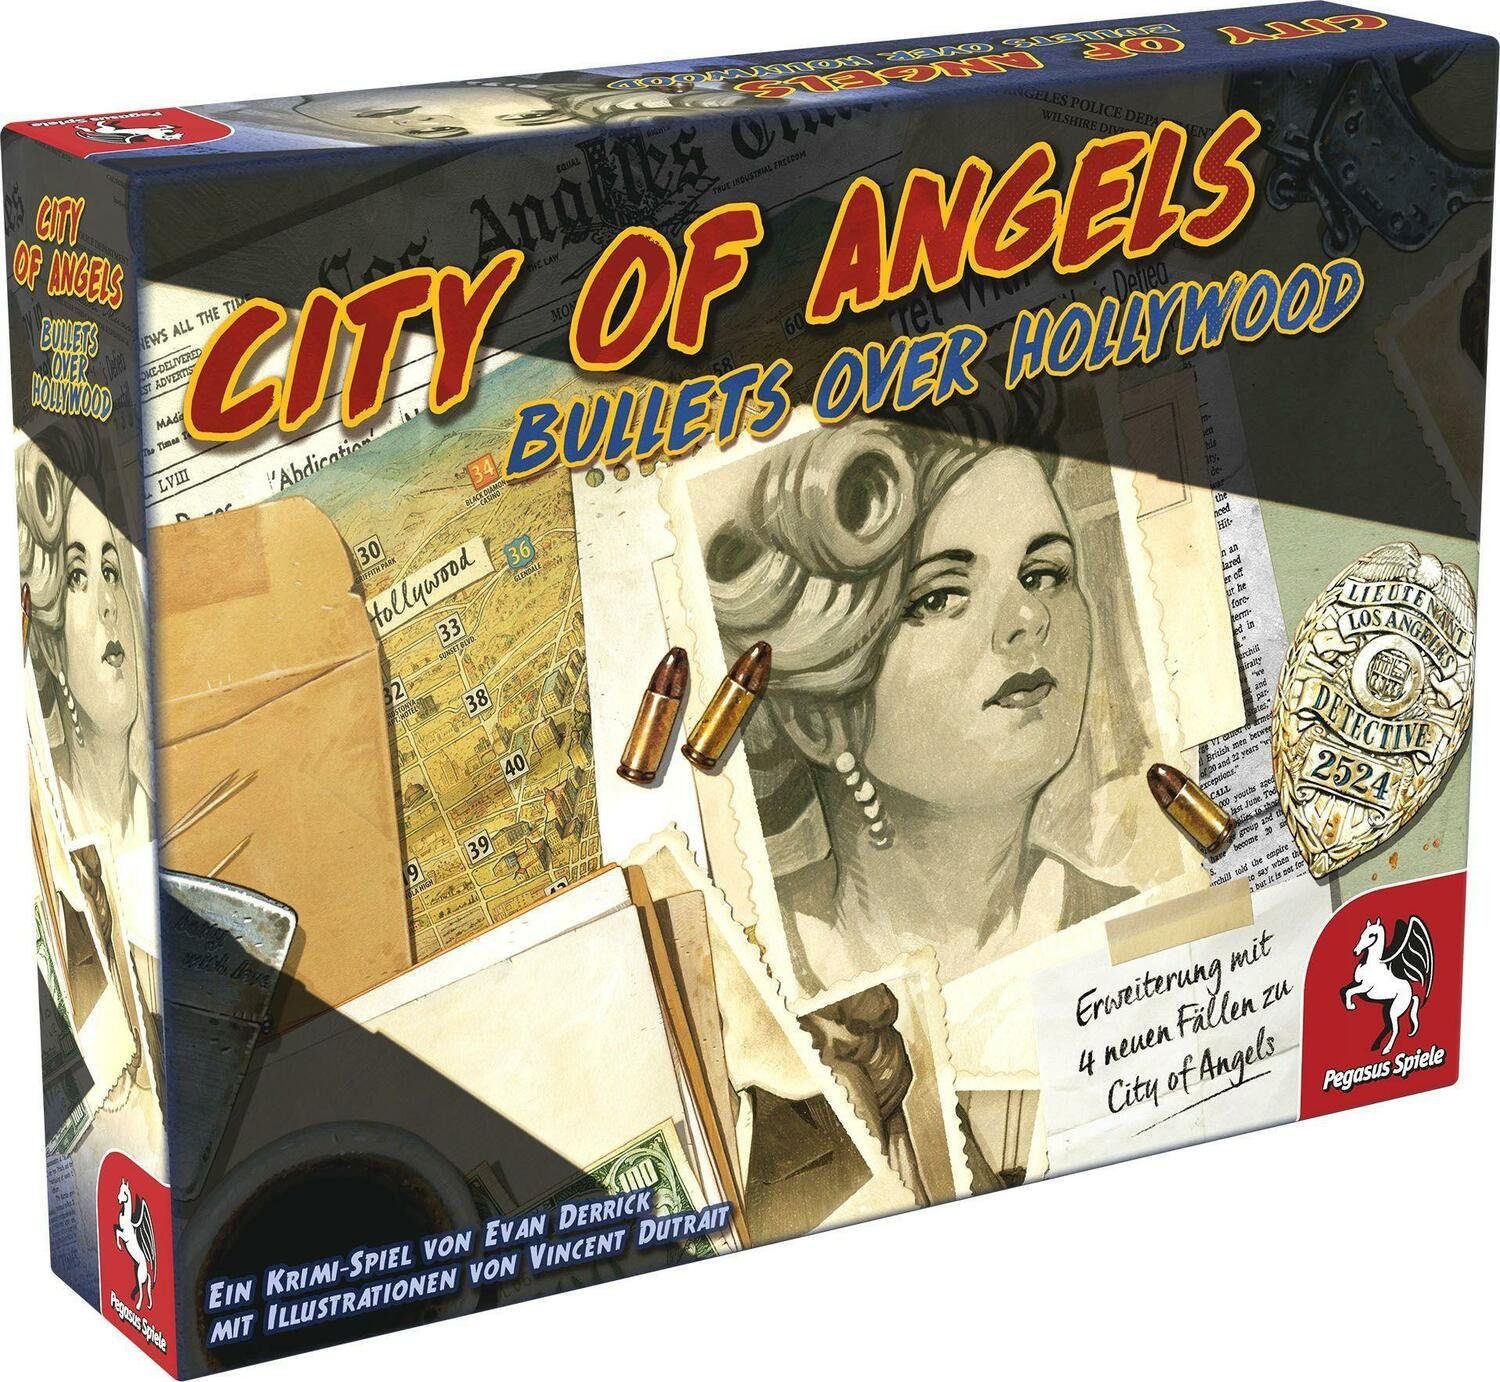 [Erweiterung] Spiele Angels: Pegasus Hollywood City of Spiel, over Bullets